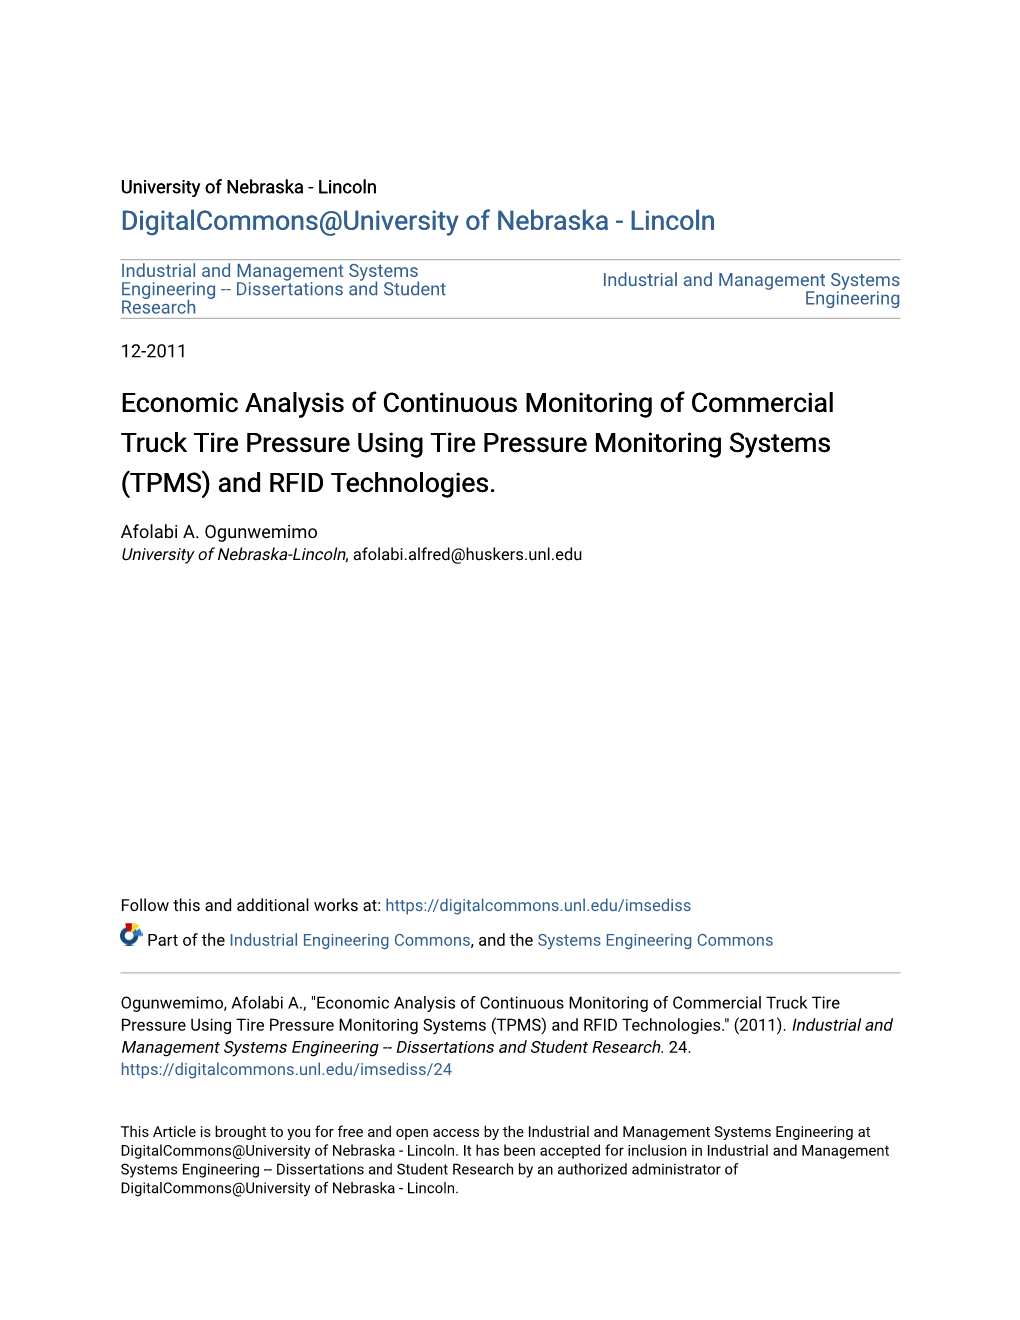 Economic Analysis of Continuous Monitoring of Commercial Truck Tire Pressure Using Tire Pressure Monitoring Systems (TPMS) and RFID Technologies